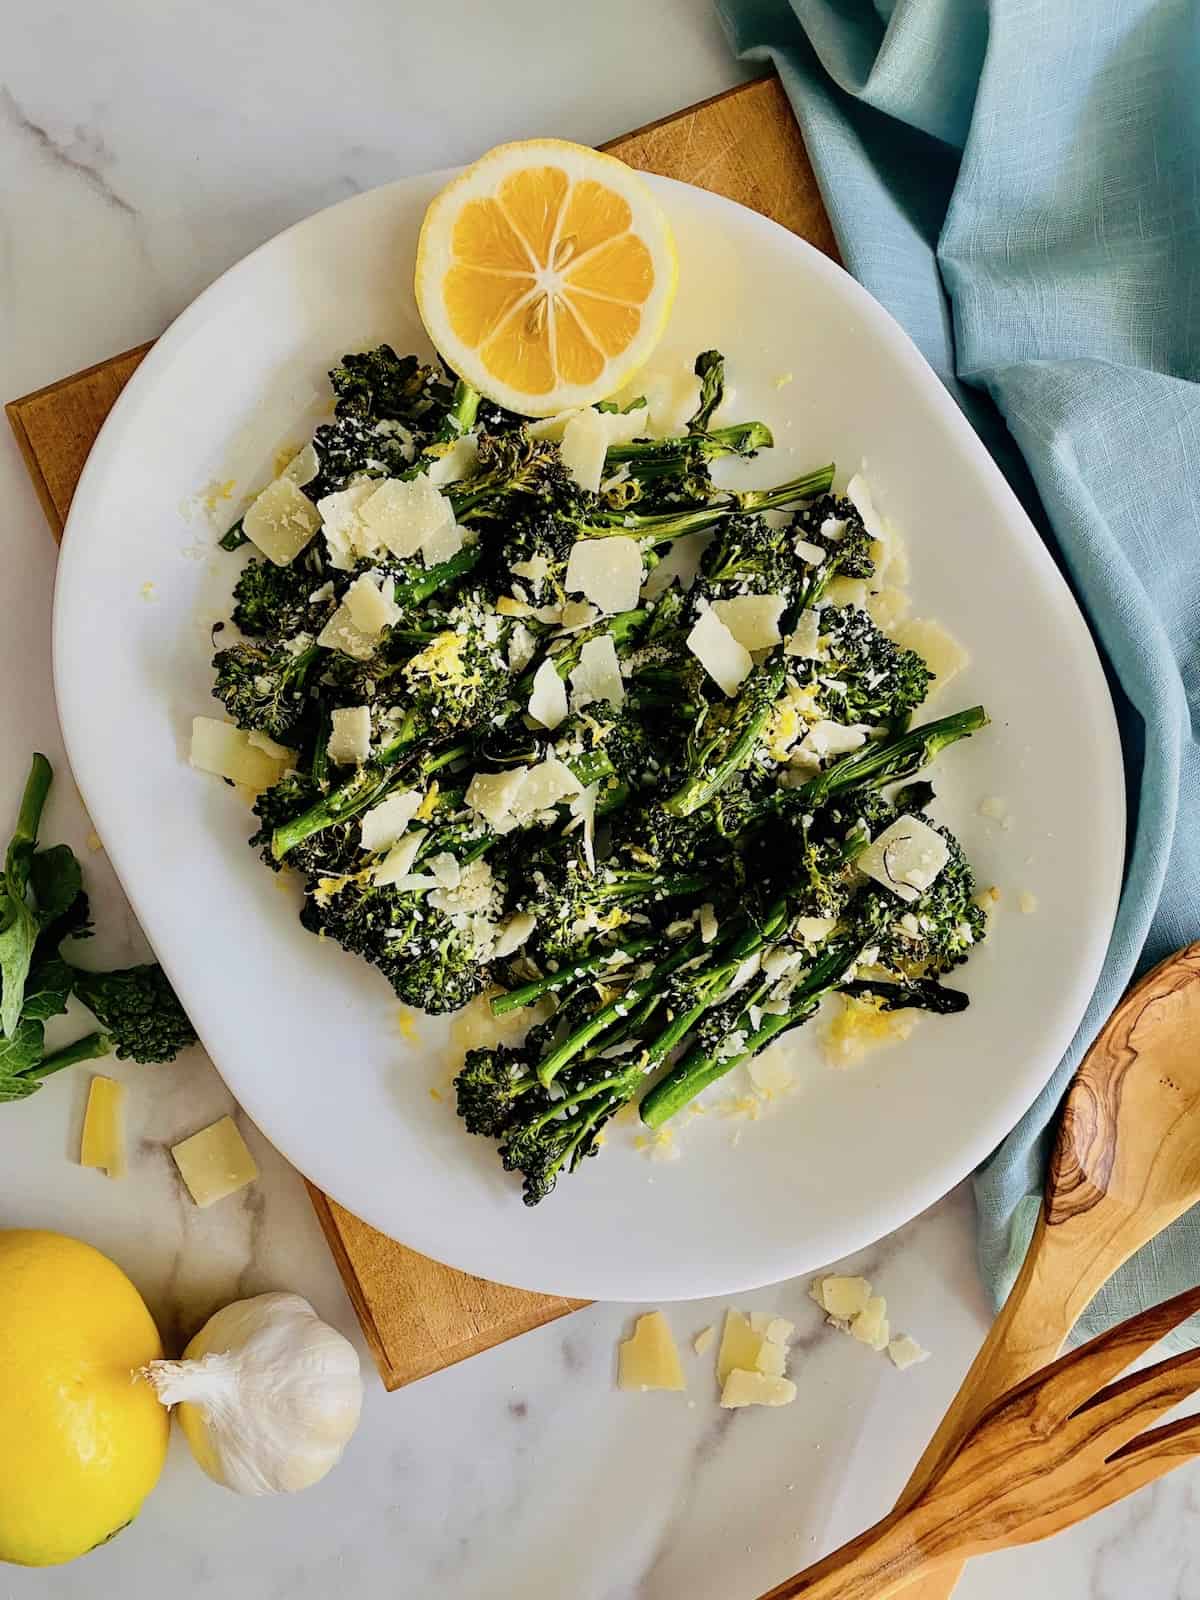 Overhead of white platter filled with broccoli topped with parmesan and lemon juice and serving utensils and blue napkin to the side.